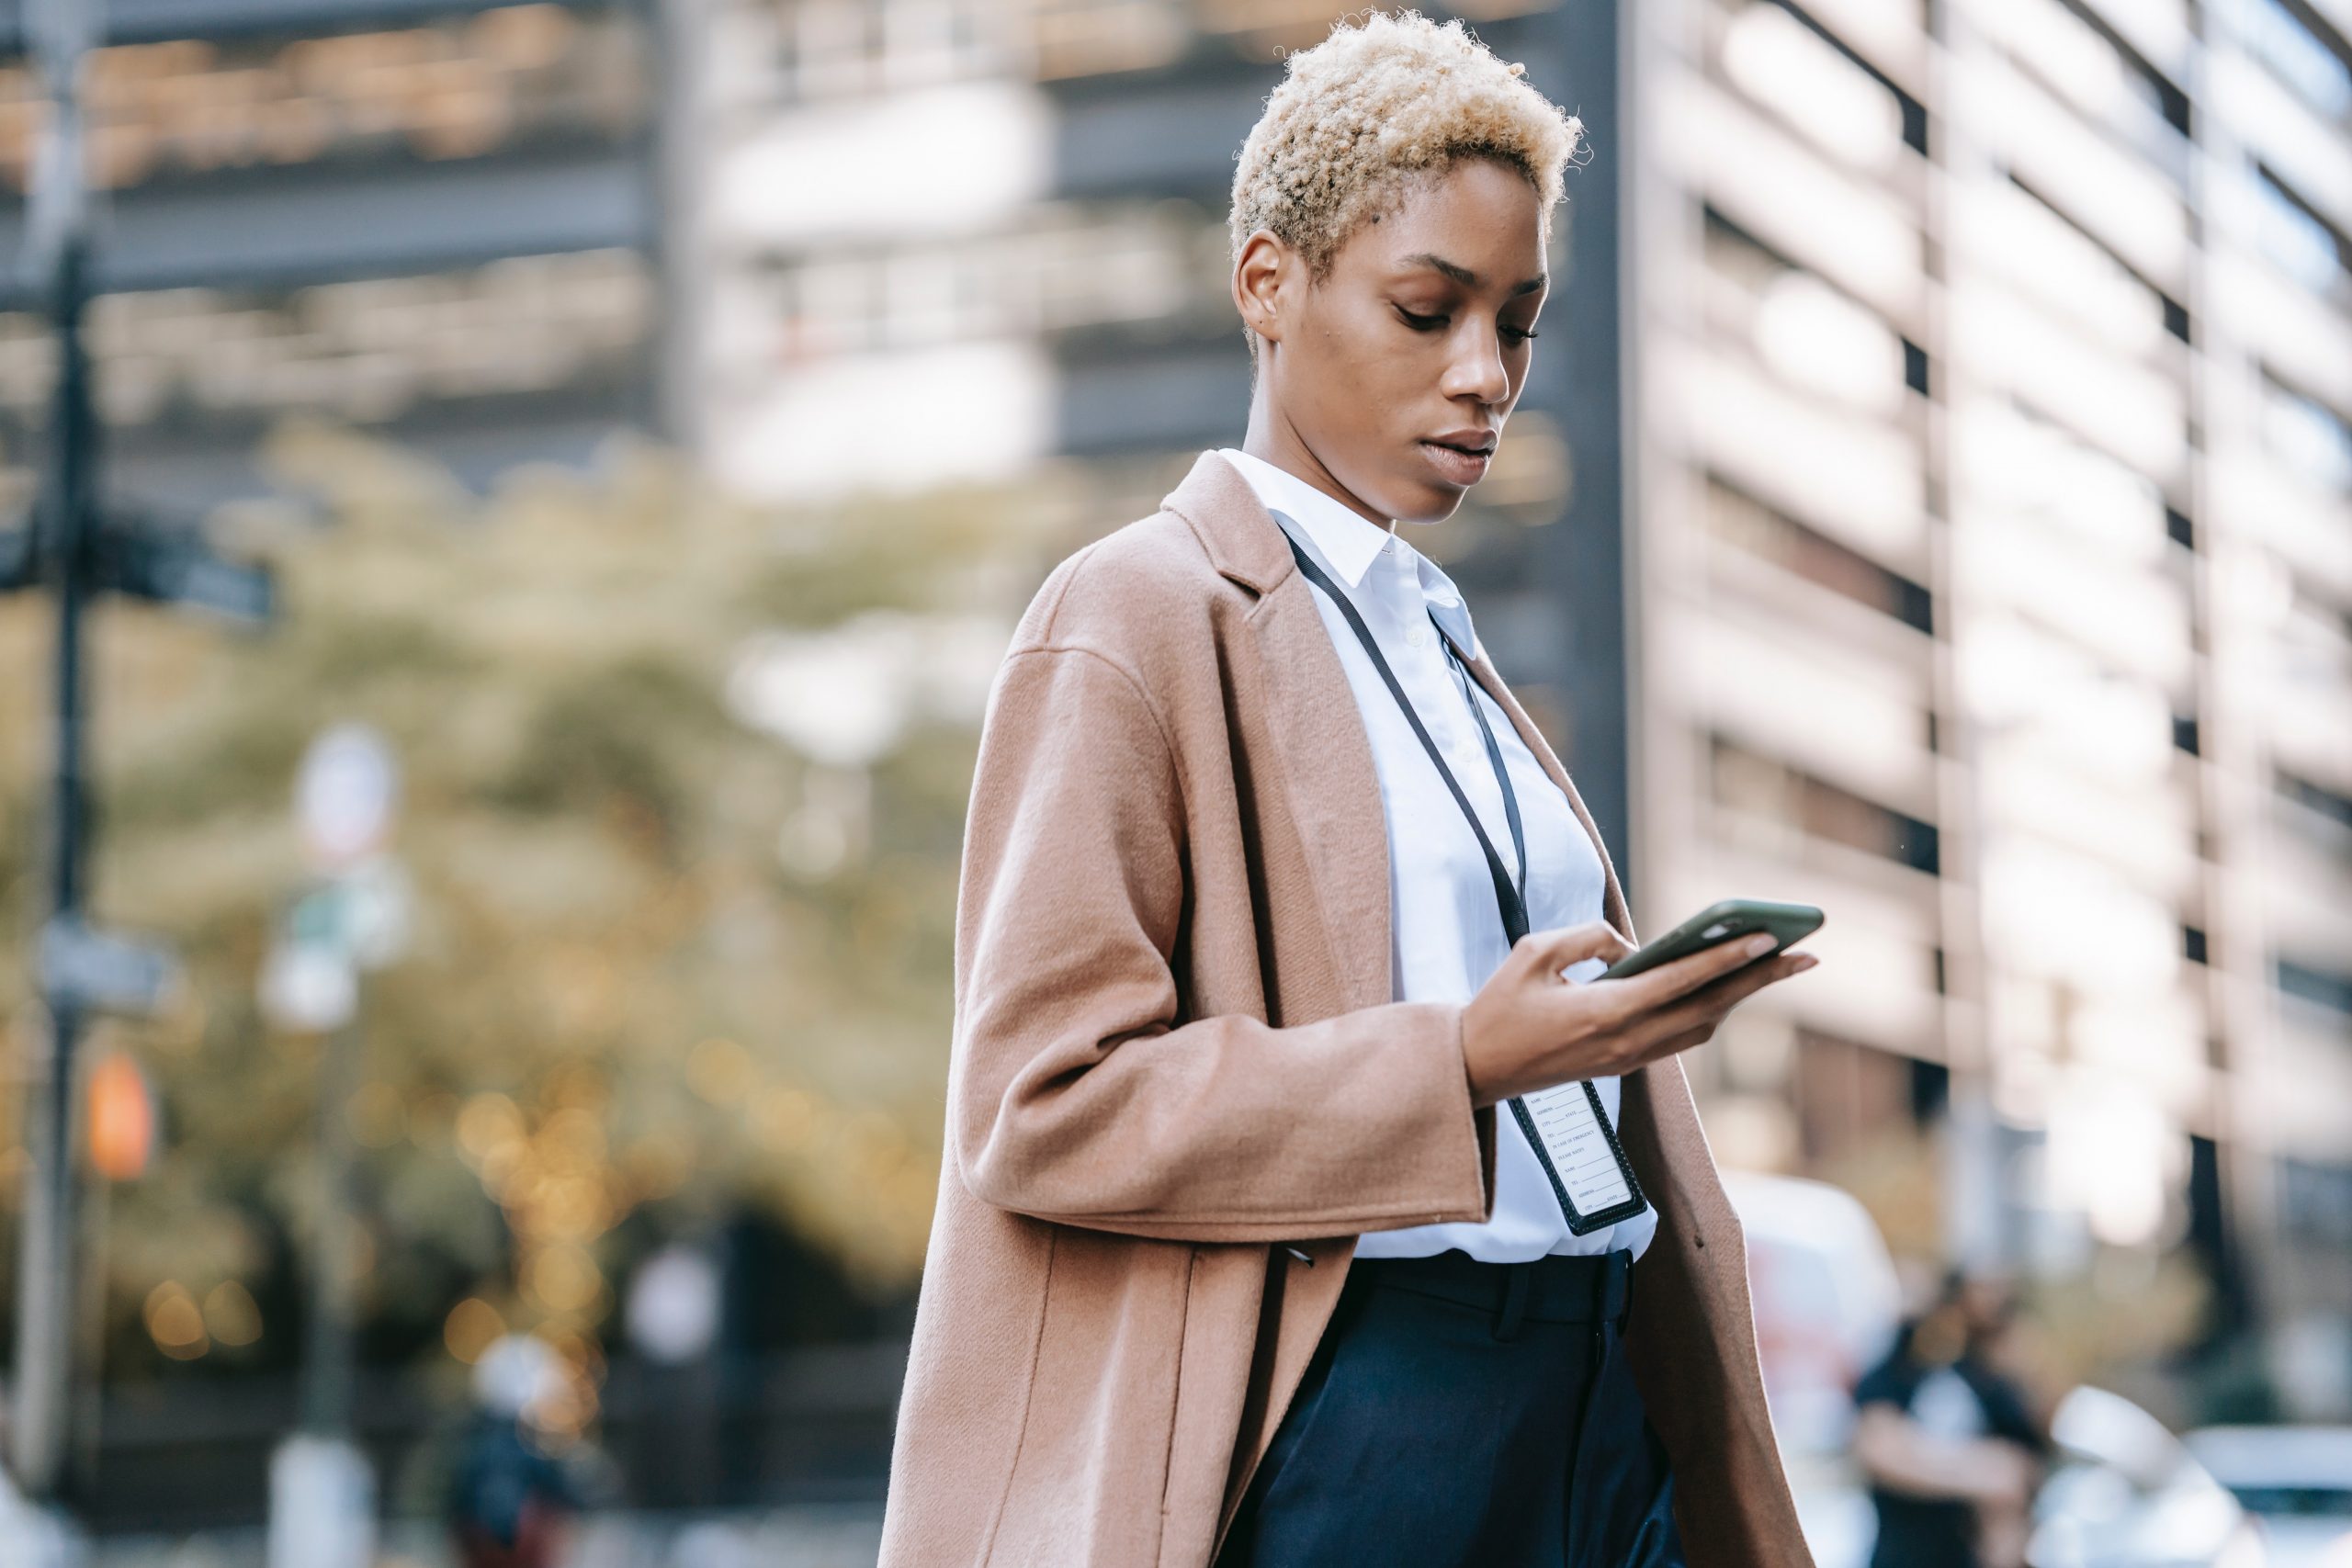 A smartly dressed businesswoman checks her wellness app while walking in the street